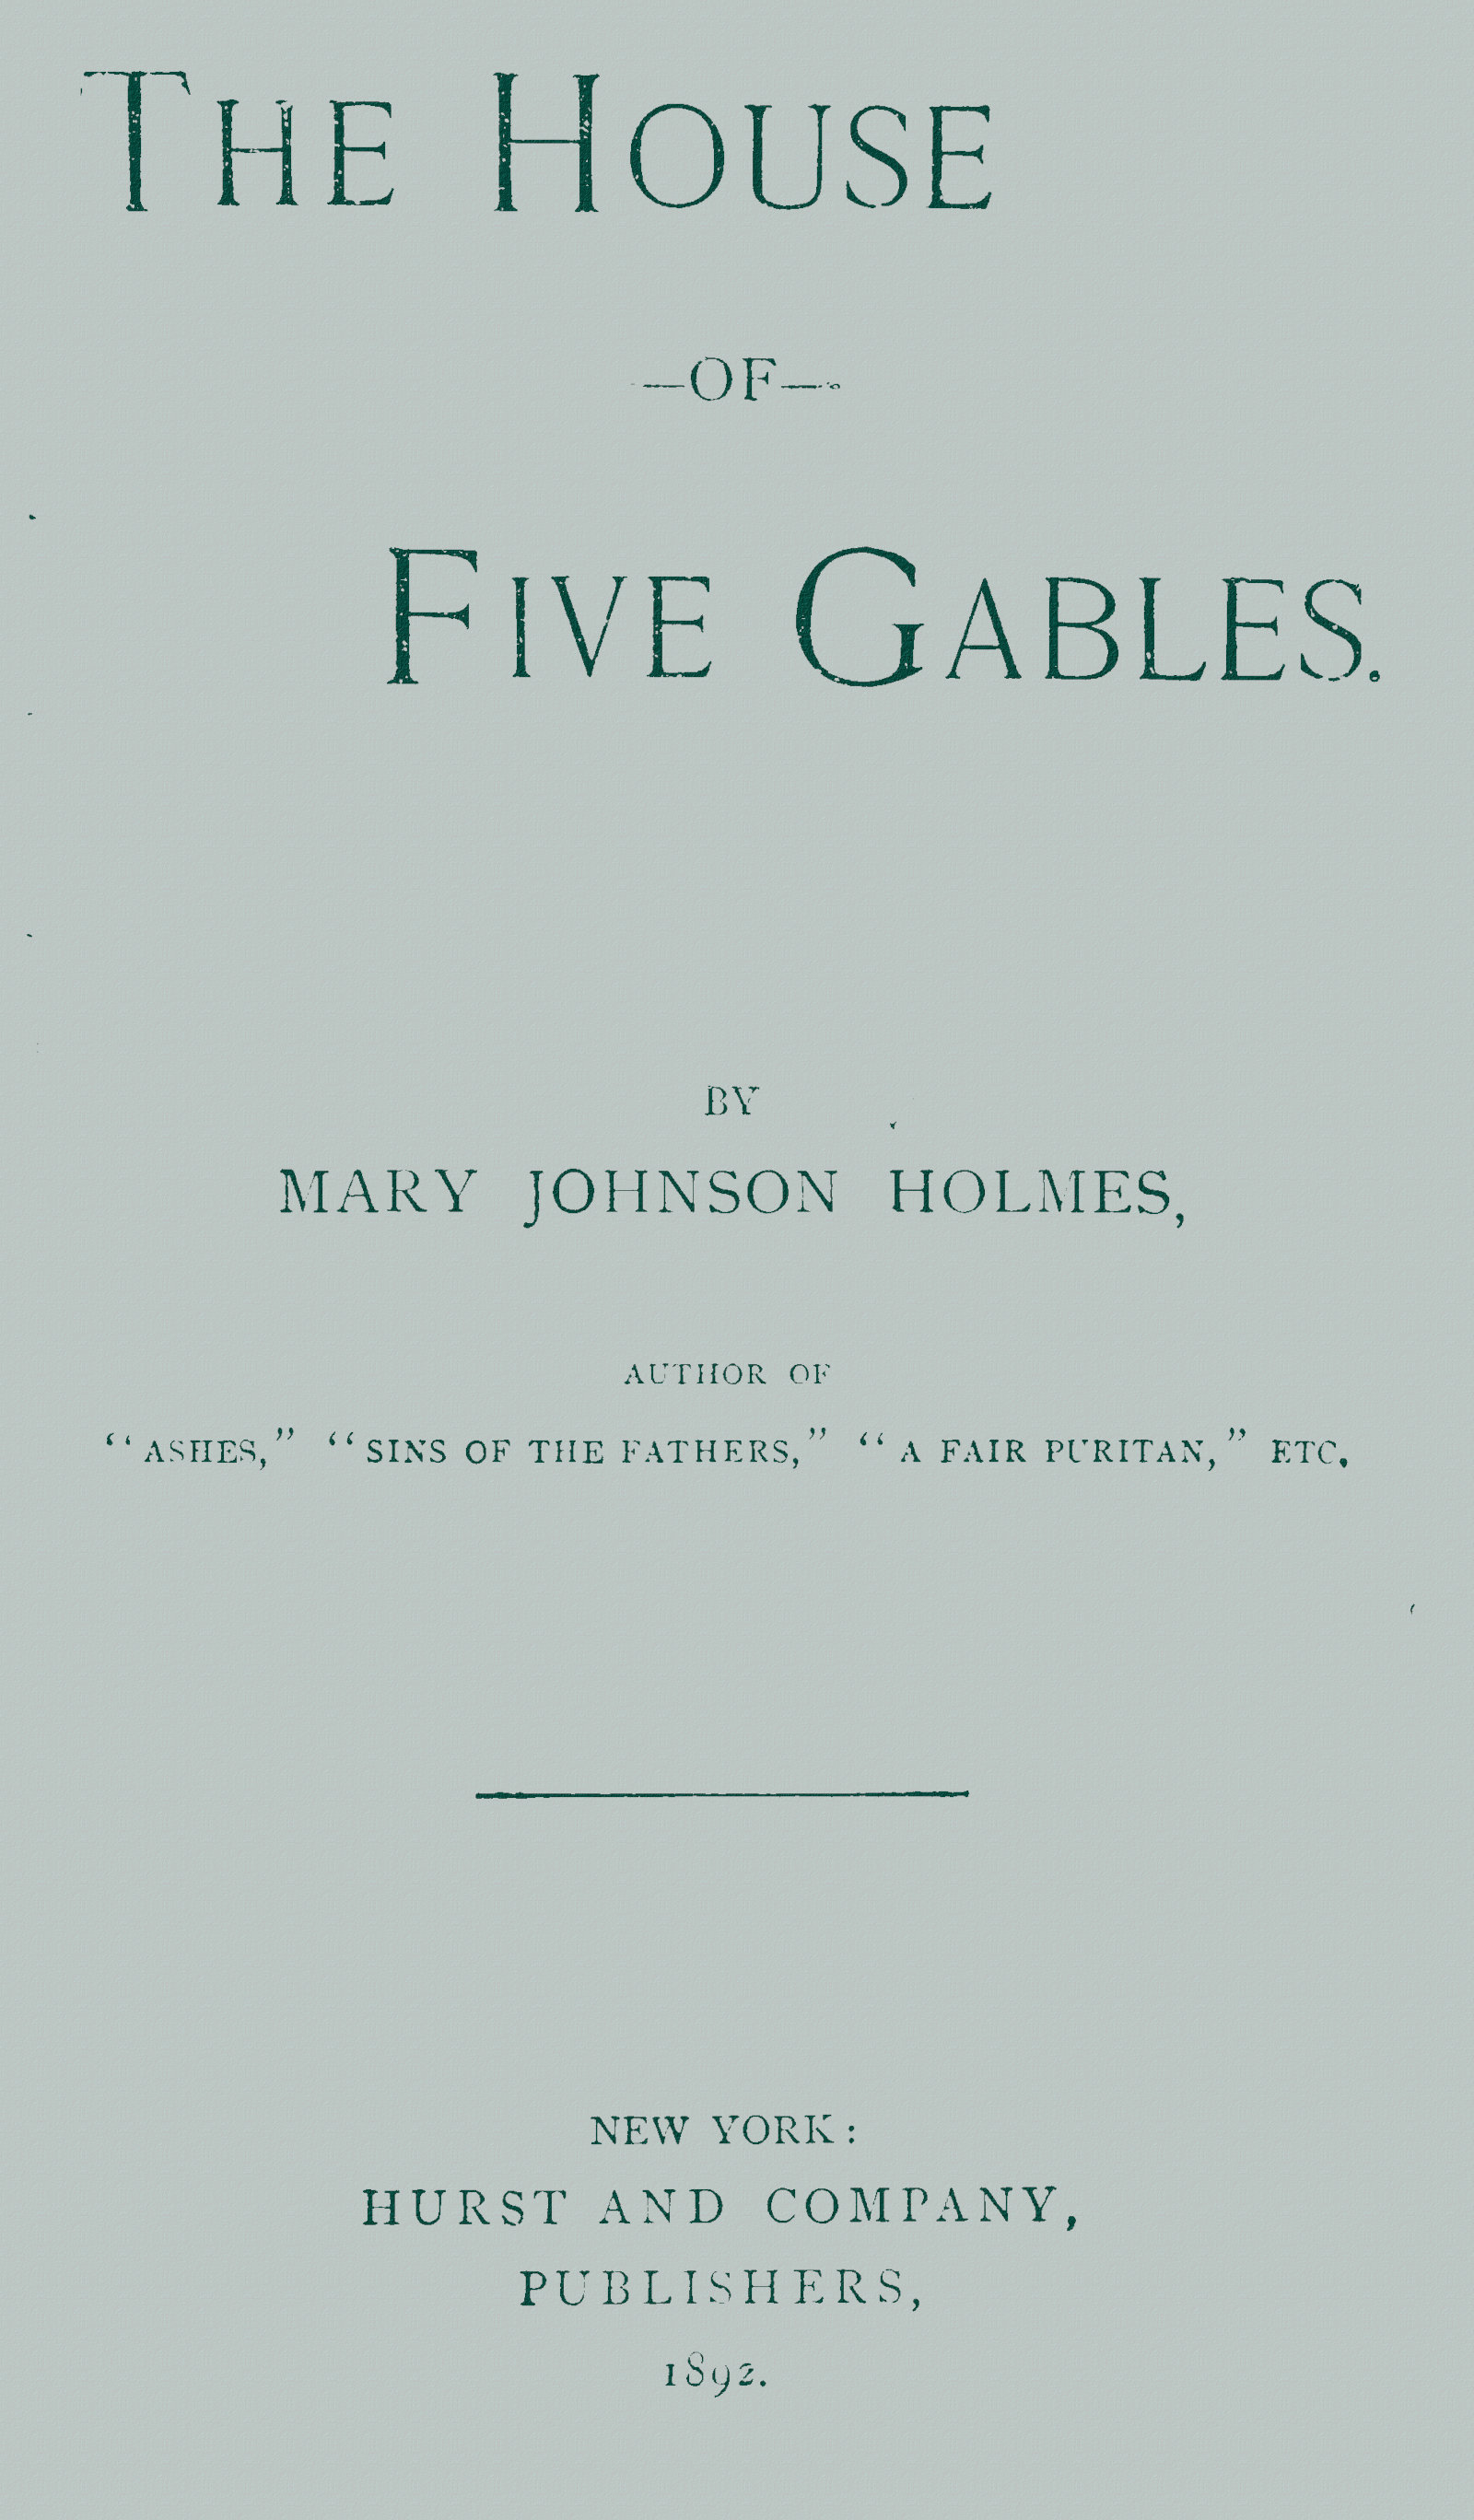 The house of five gables